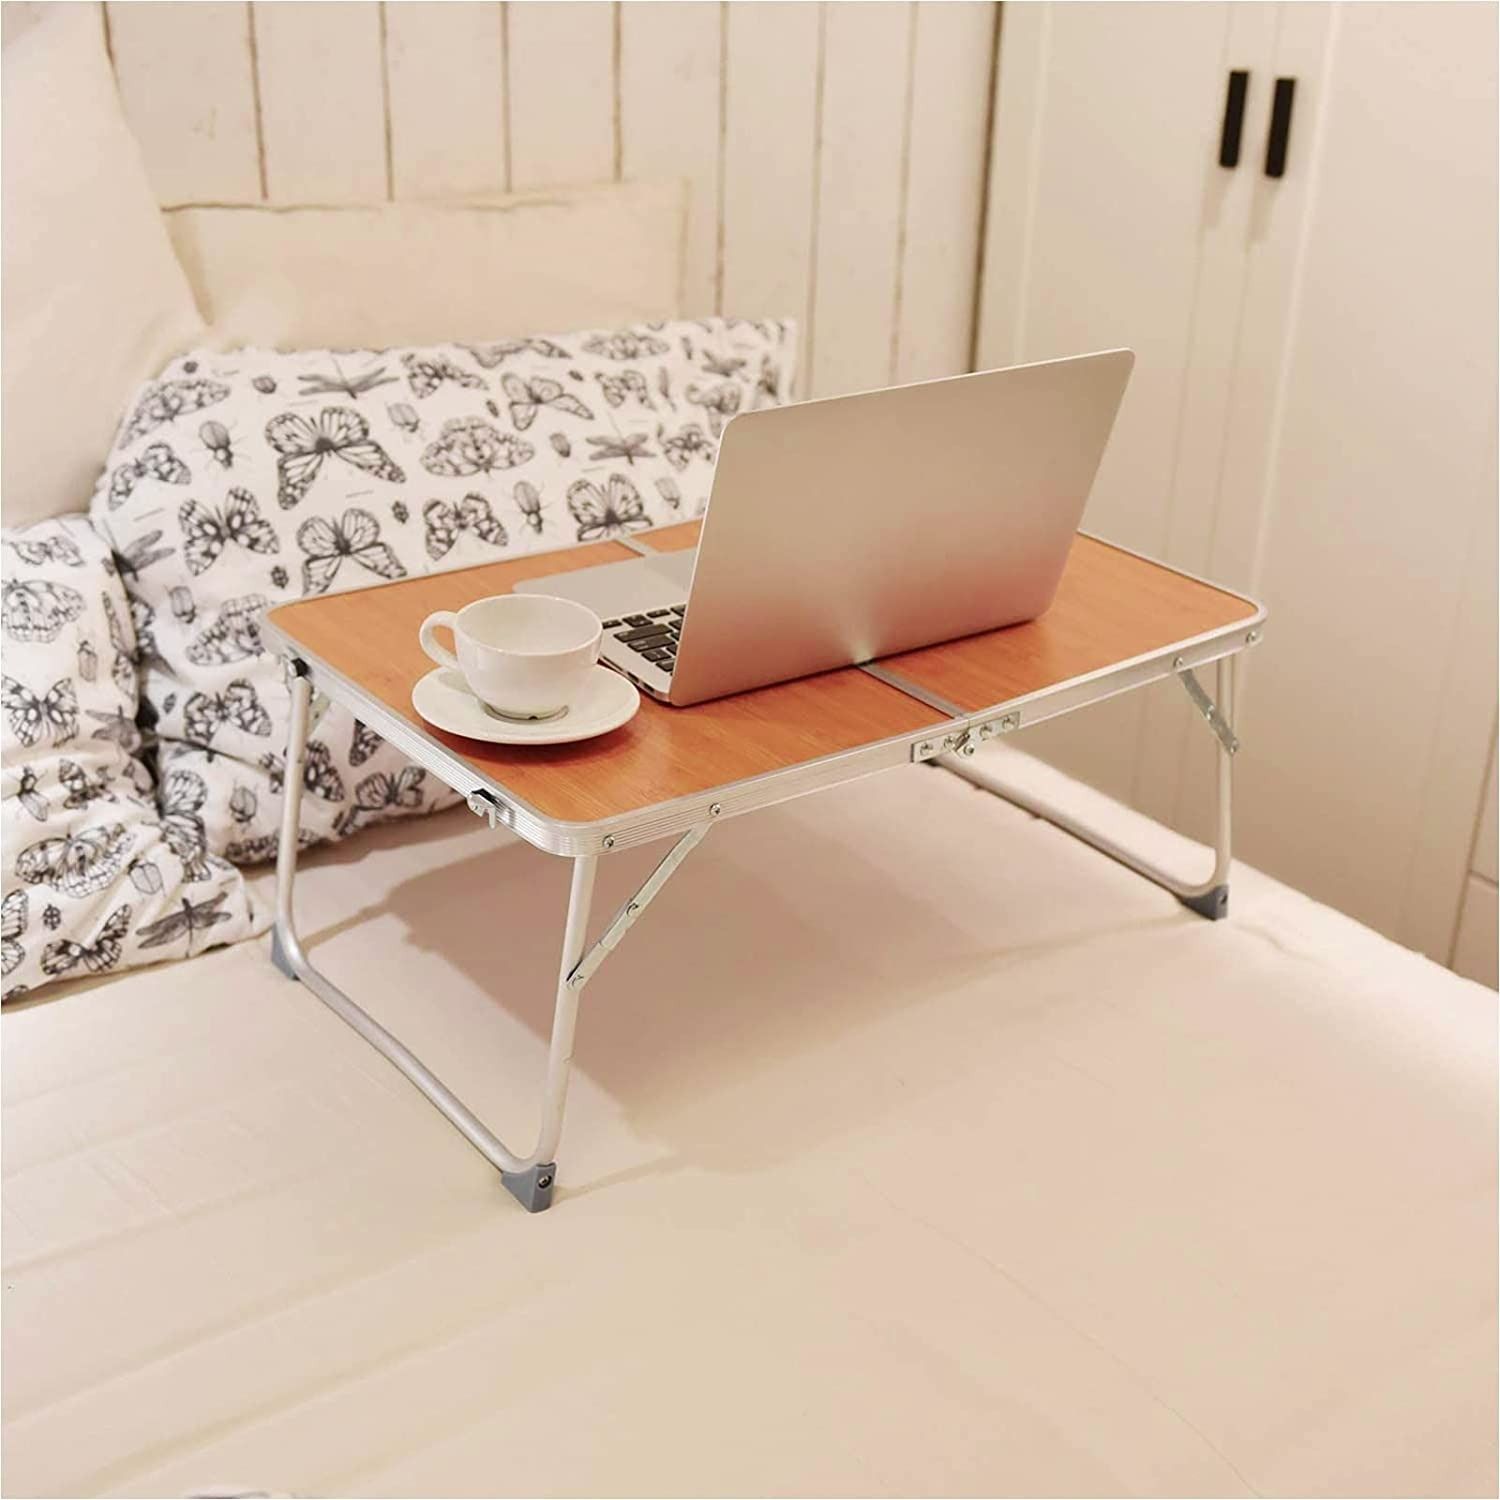 Breakfast In Bed Tray Table , Lap Desk, Foldable Laptop Table,Laptop Stand  For Sofa, Bed Trays For Eating And Laptops, Small Picnic Tables Portable  Bamboo Wood Grain From Promic, $36.46